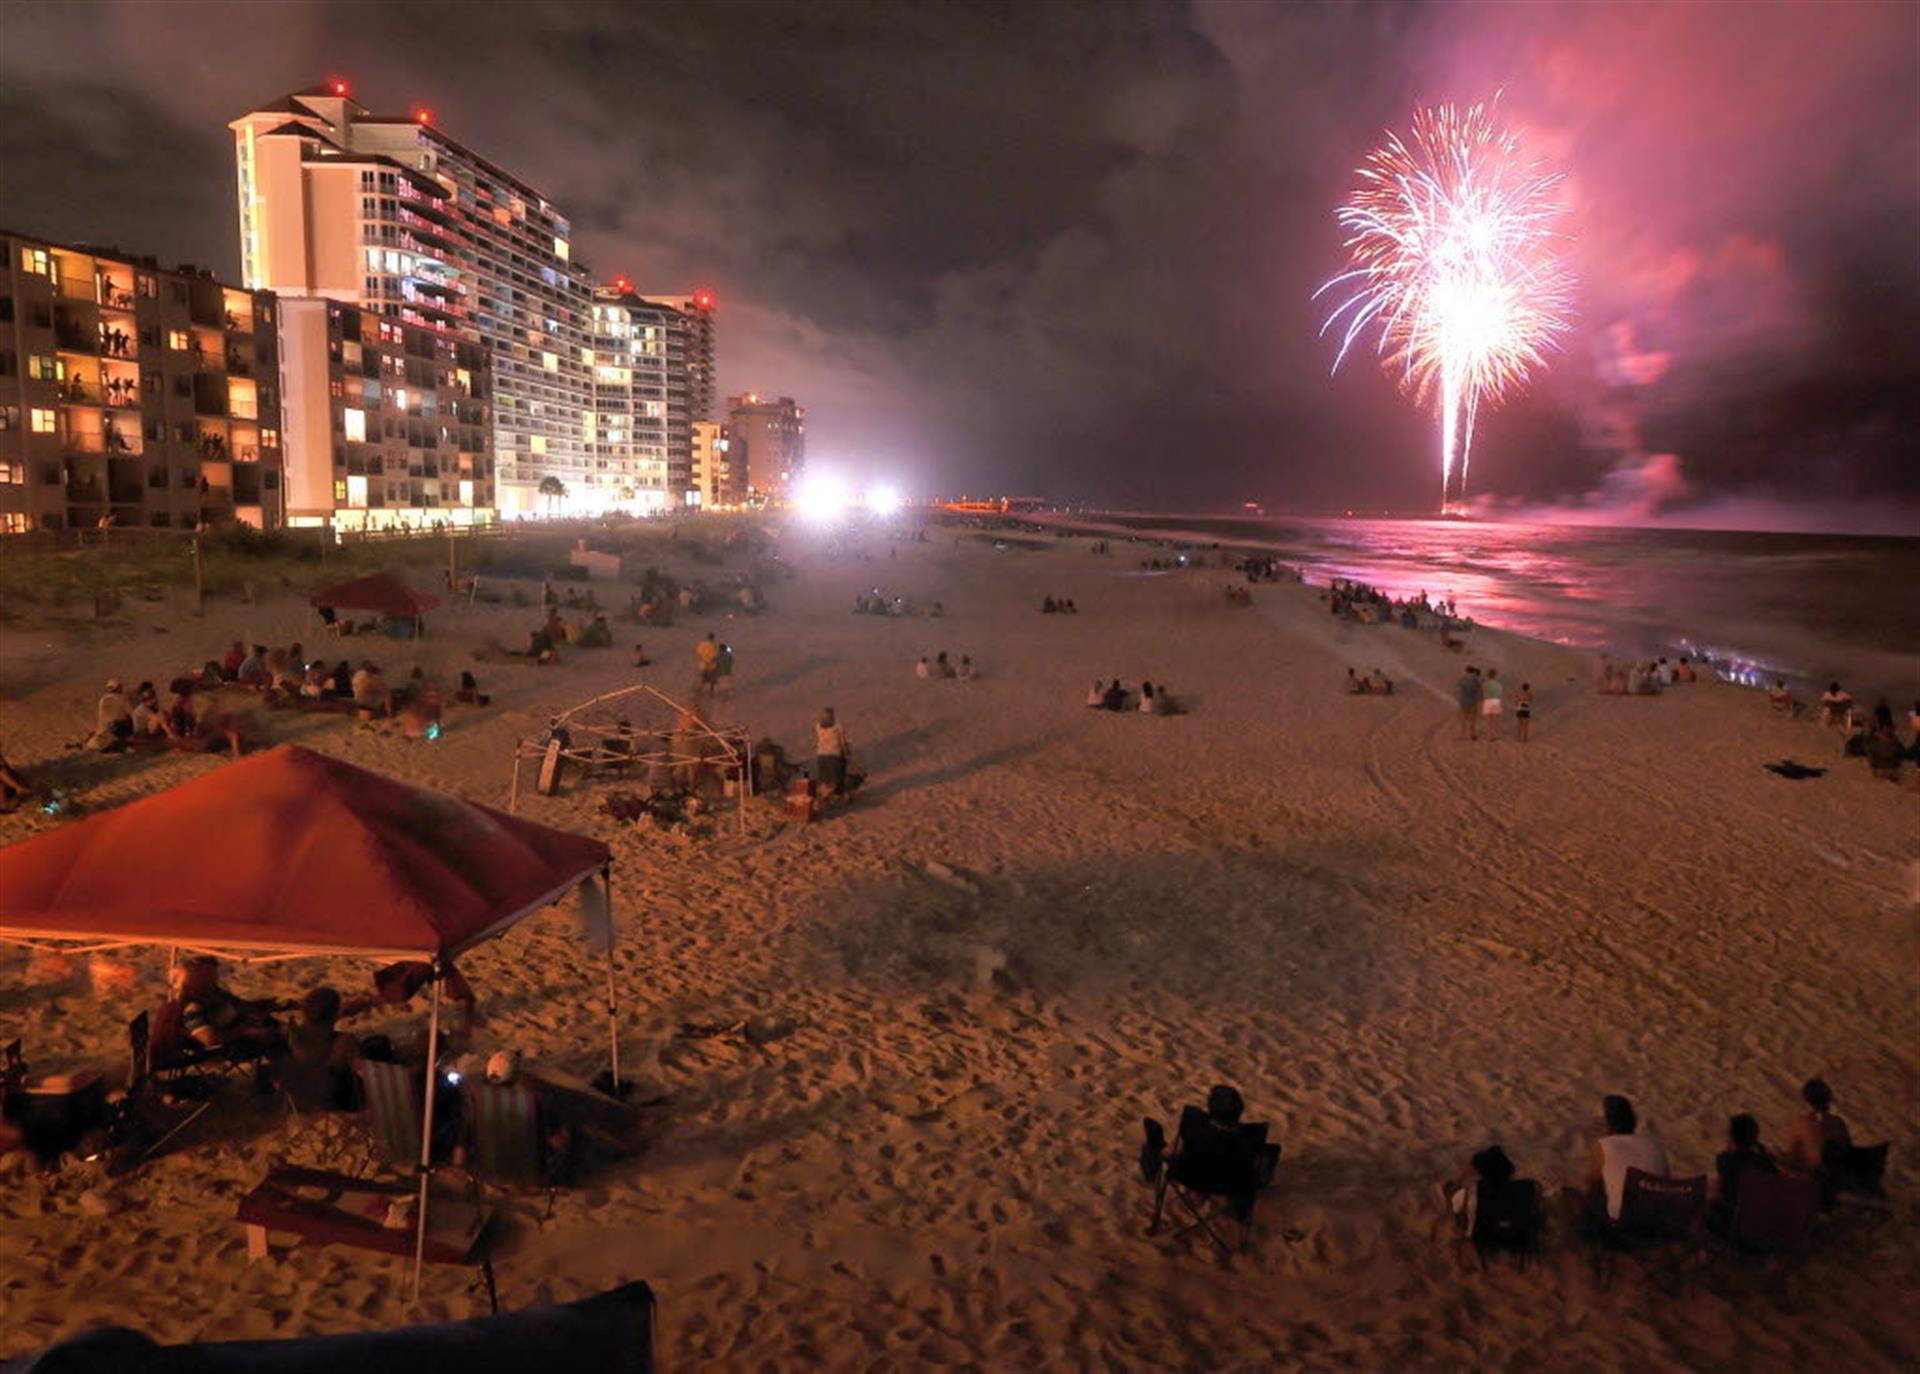 The City of Gulf Shores Fourth of July Fireworks Celebration